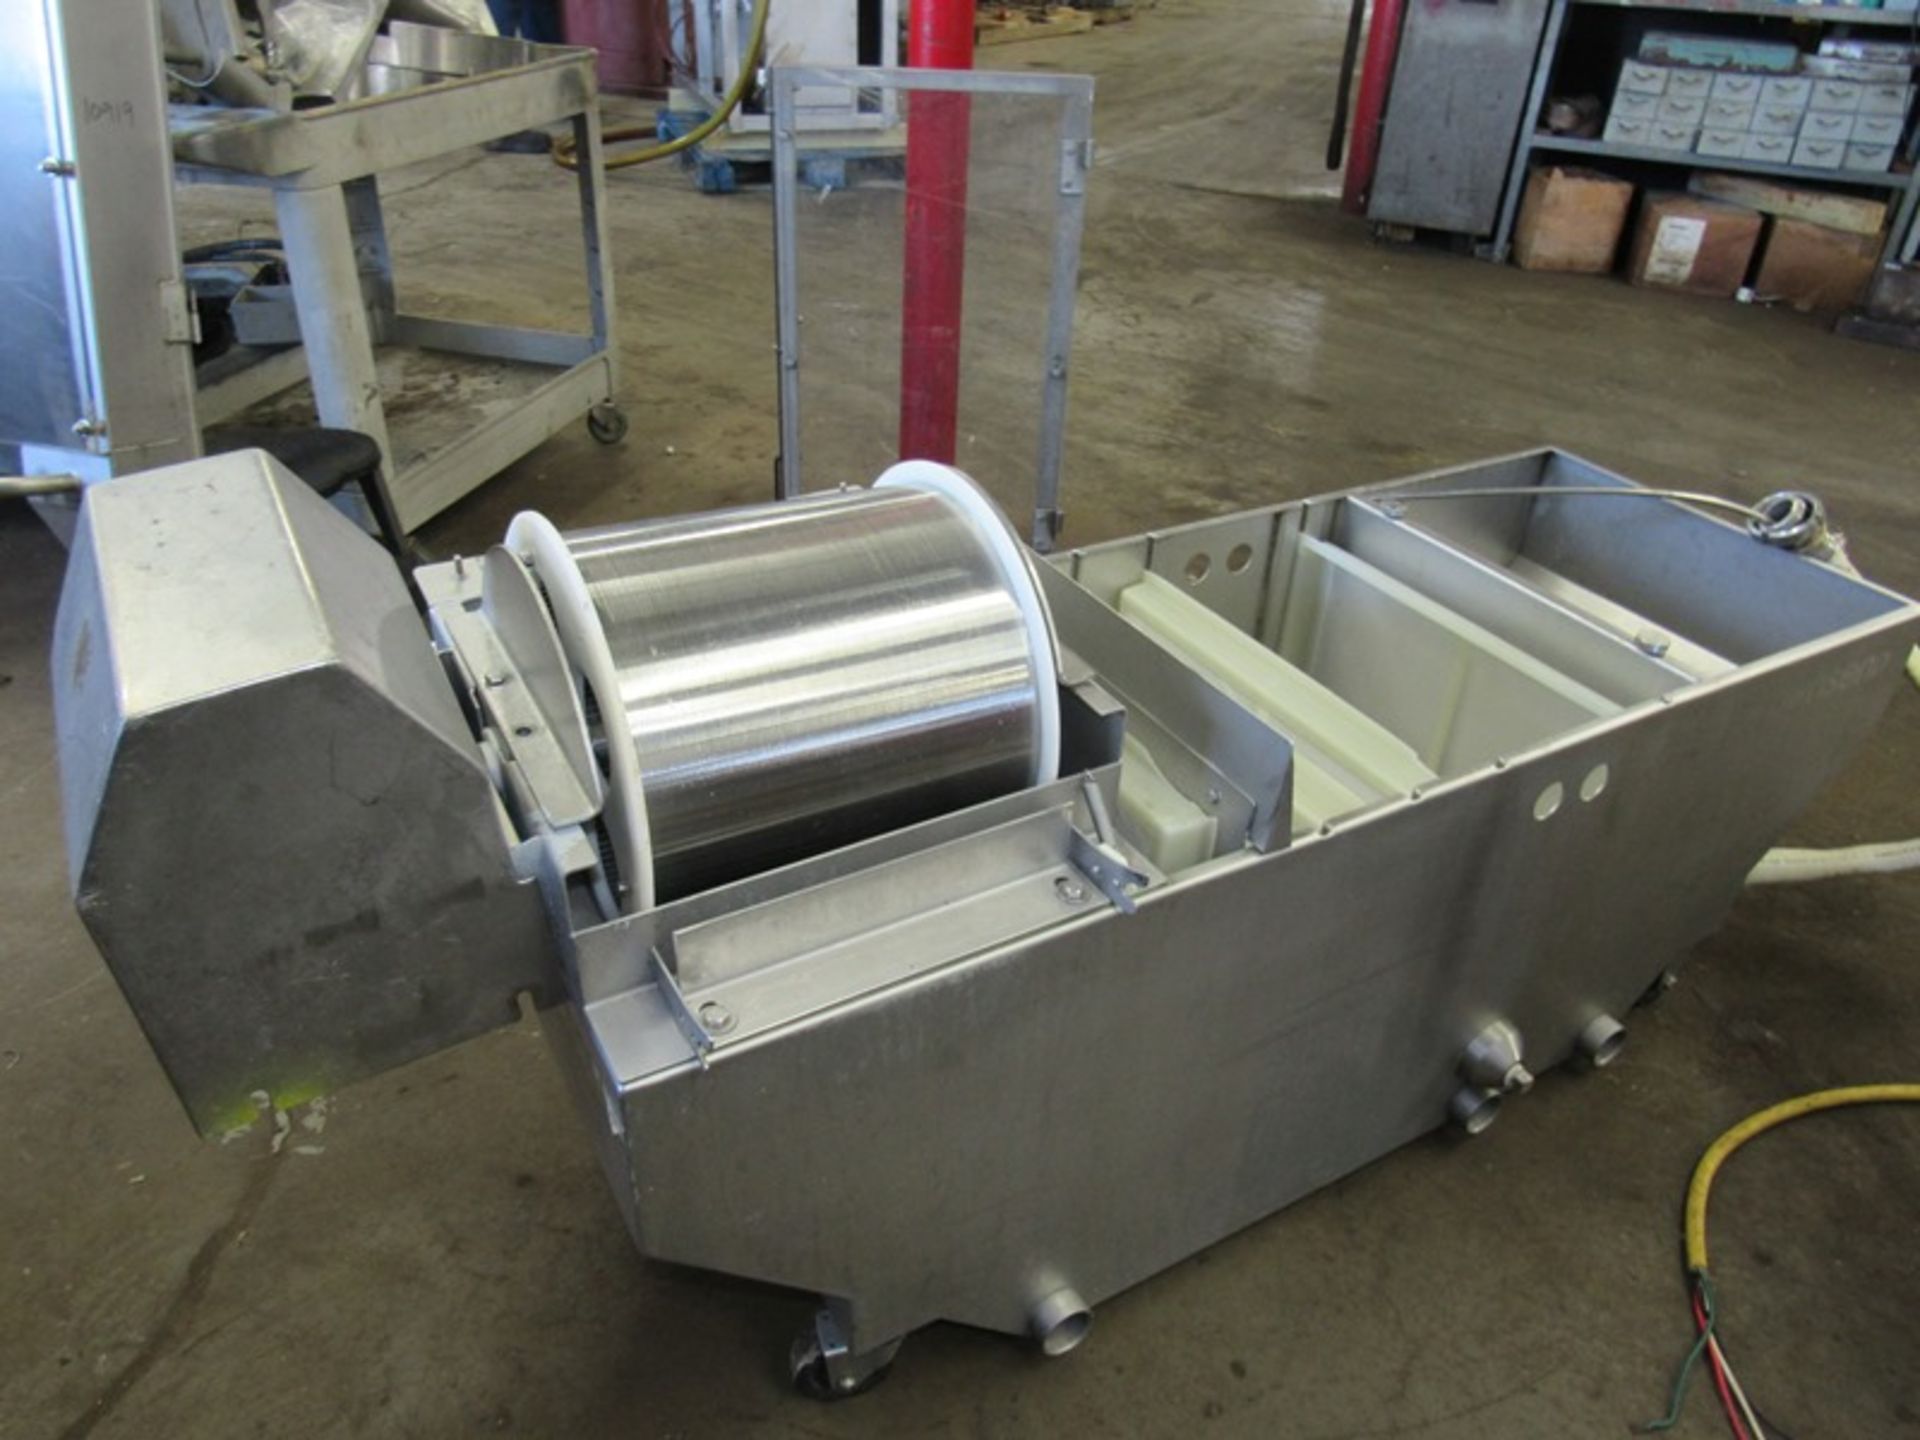 Townsend Mdl. 1450 Brine Injector, 14" W X 6' L stainless steel conveyor, stainless steel portable - Image 9 of 12